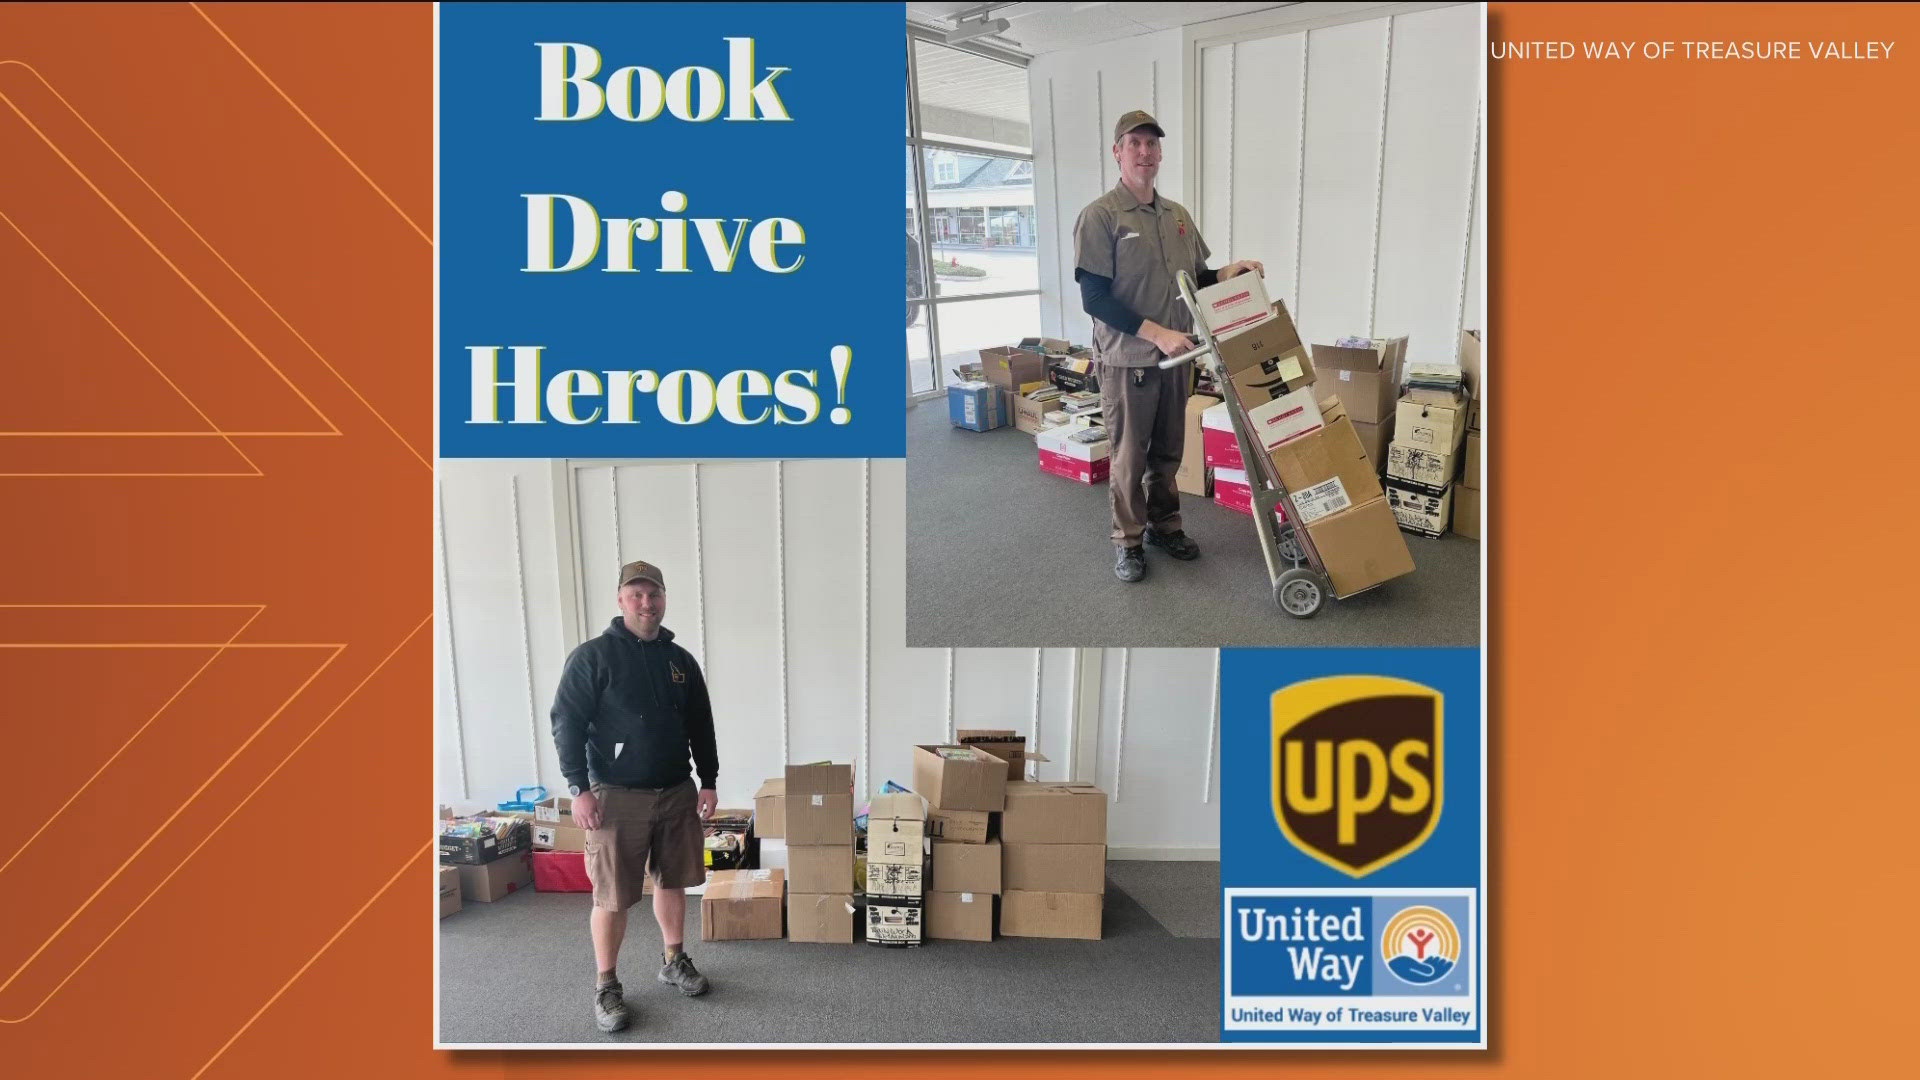 The drive gets books into the hands of children who need them, and it couldn't happen without the UPS team.